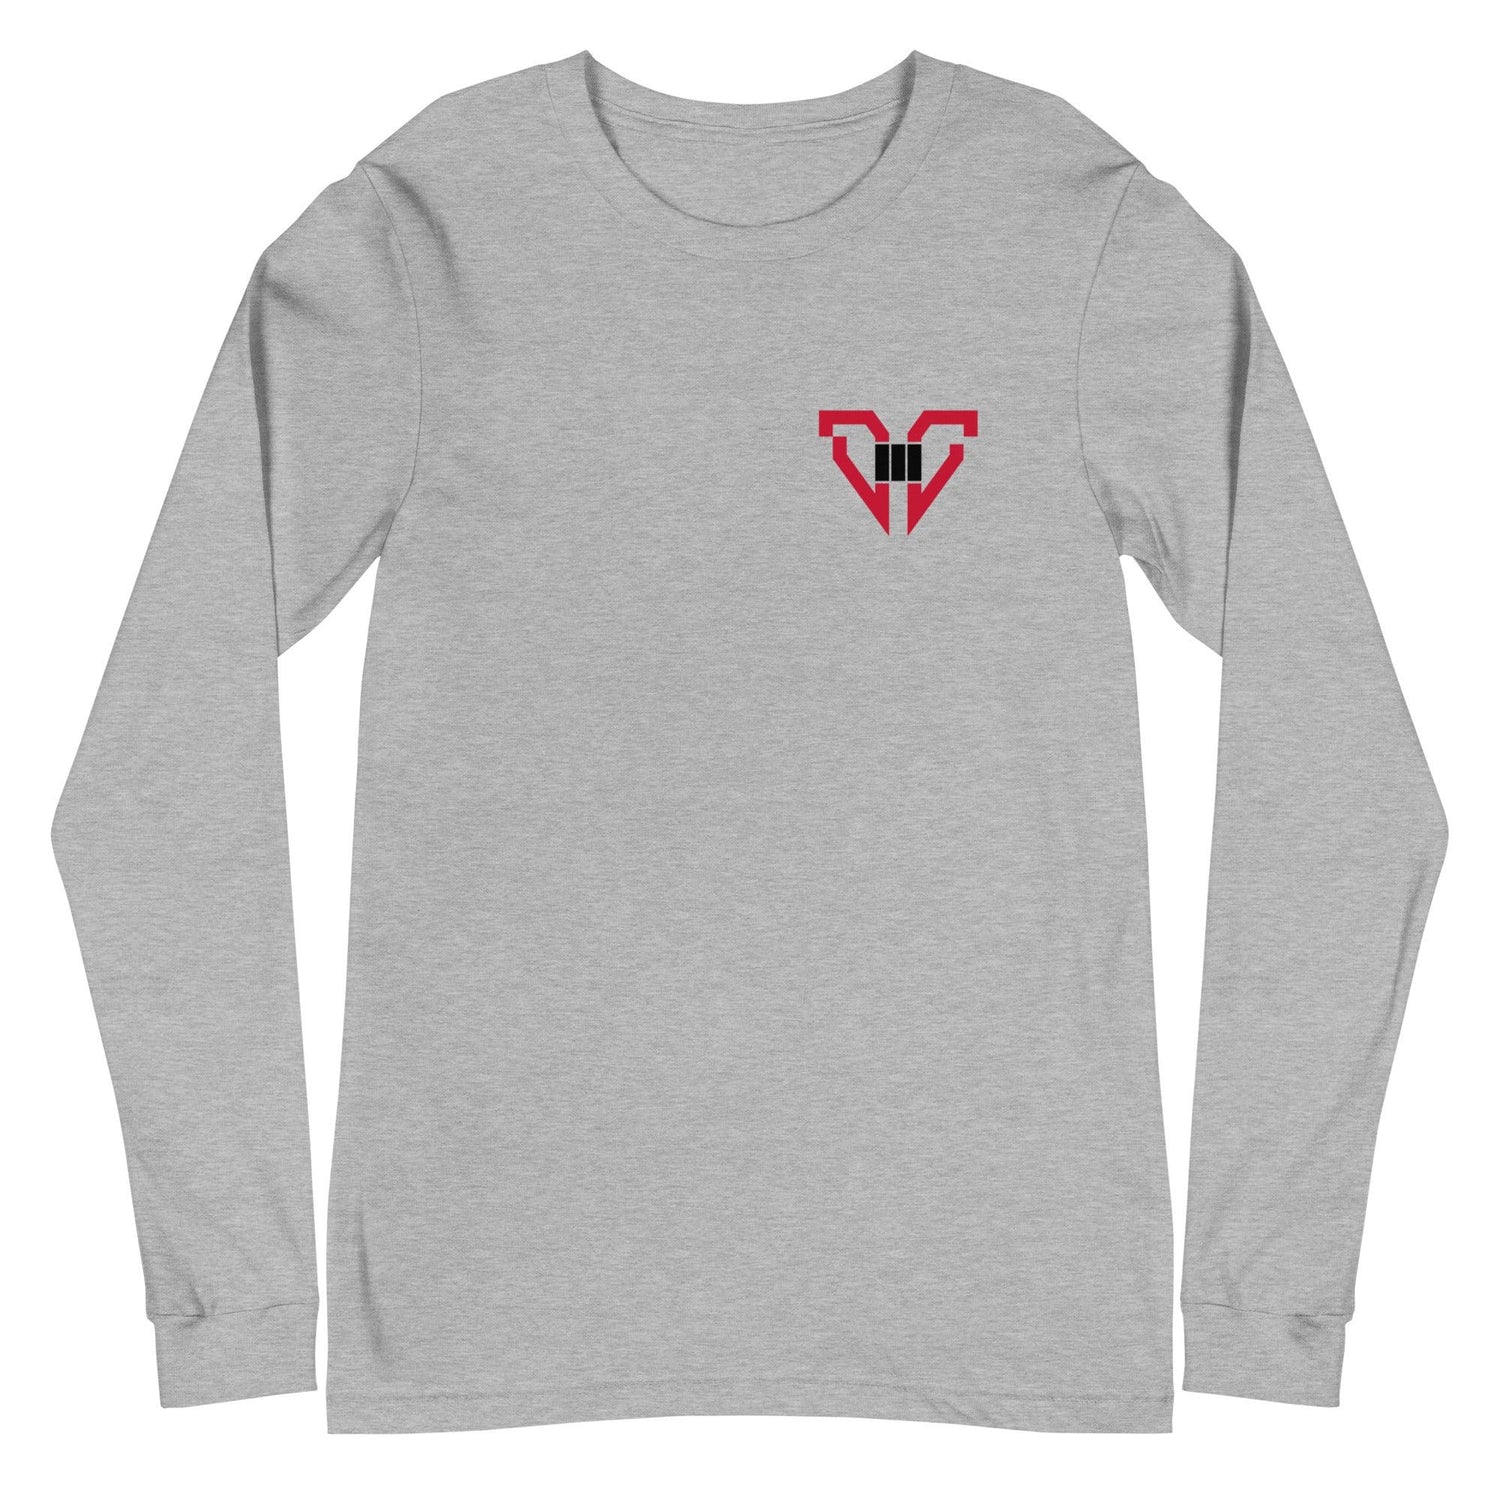 Donel Cathcart "DCIII" Long Sleeve Tee - Fan Arch